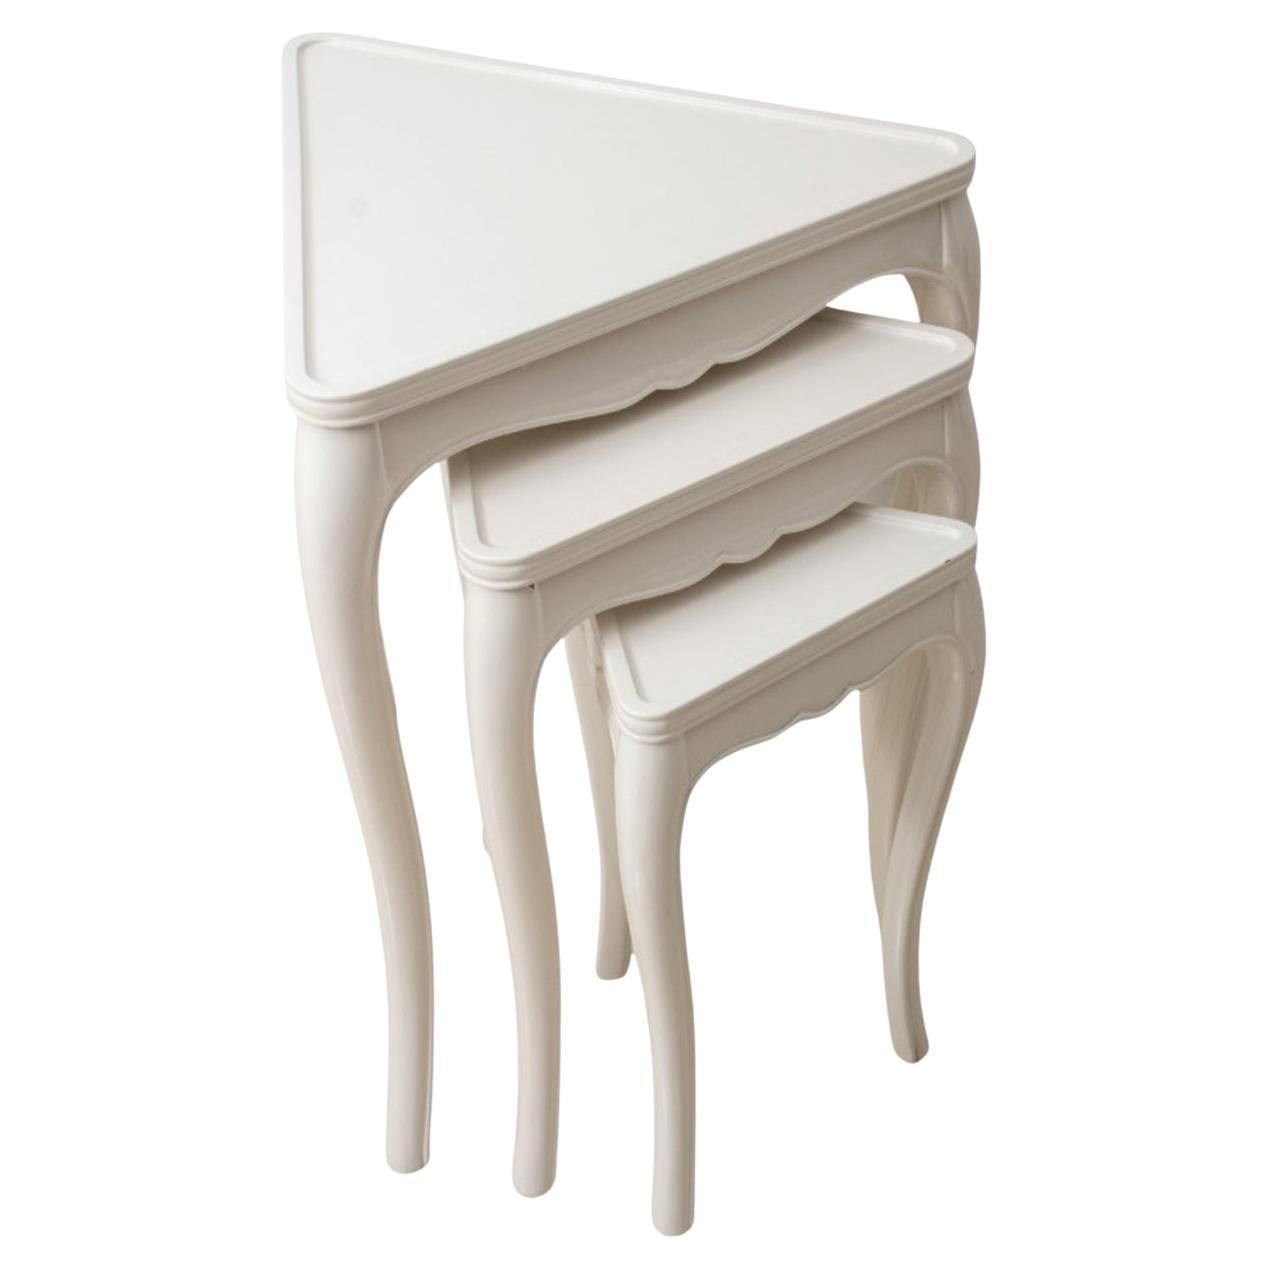 White Lacquered Triangular Nesting Tables, Set of 3